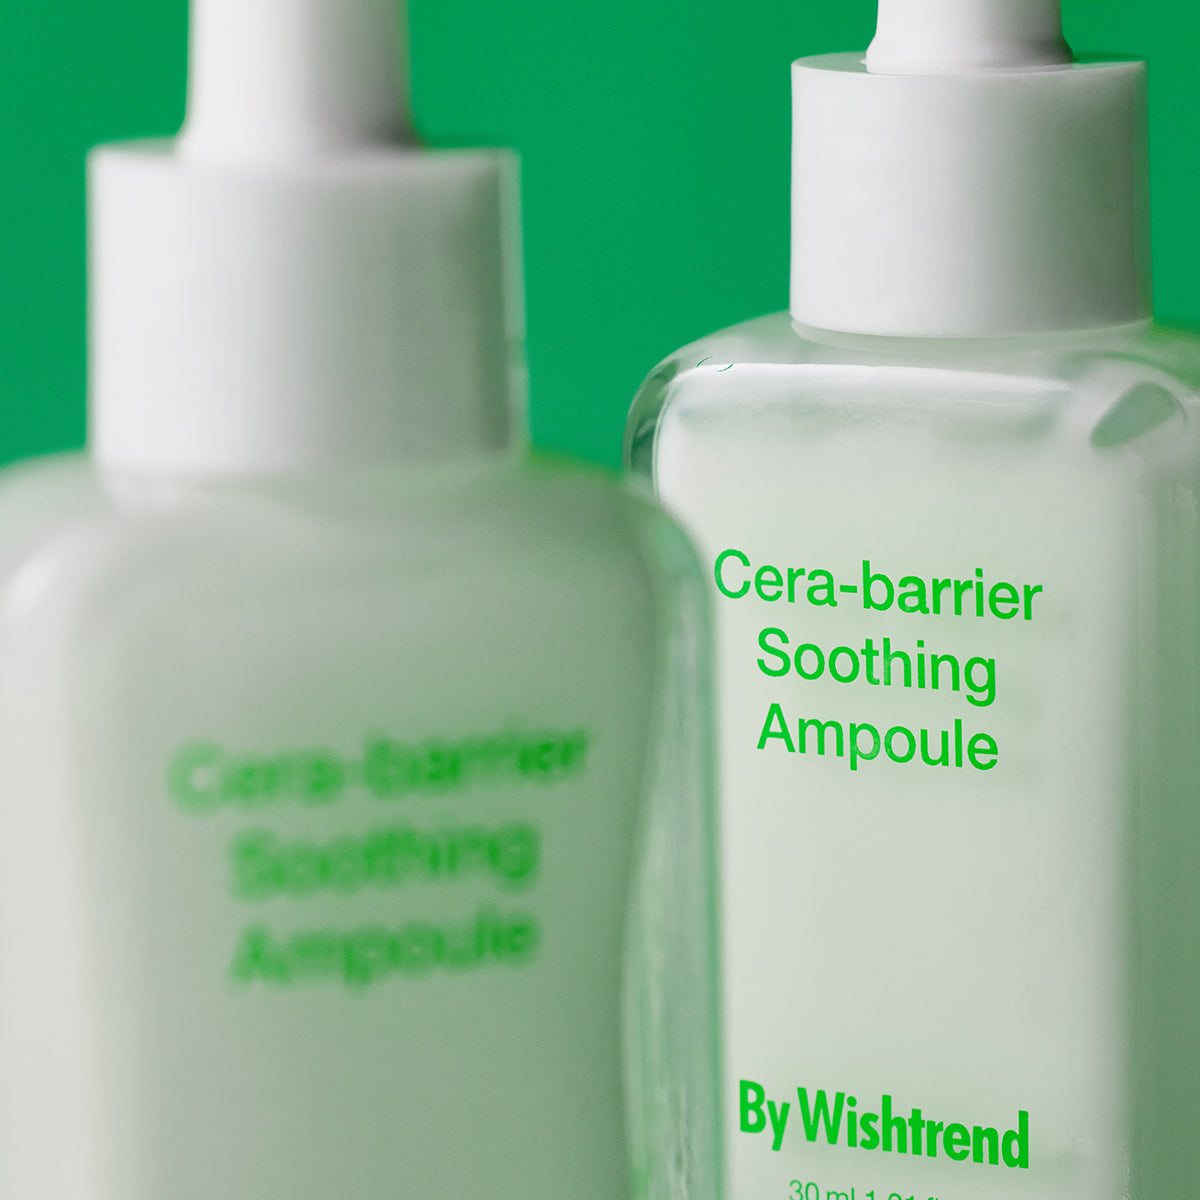 Cera-barrier Soothing Ampoule